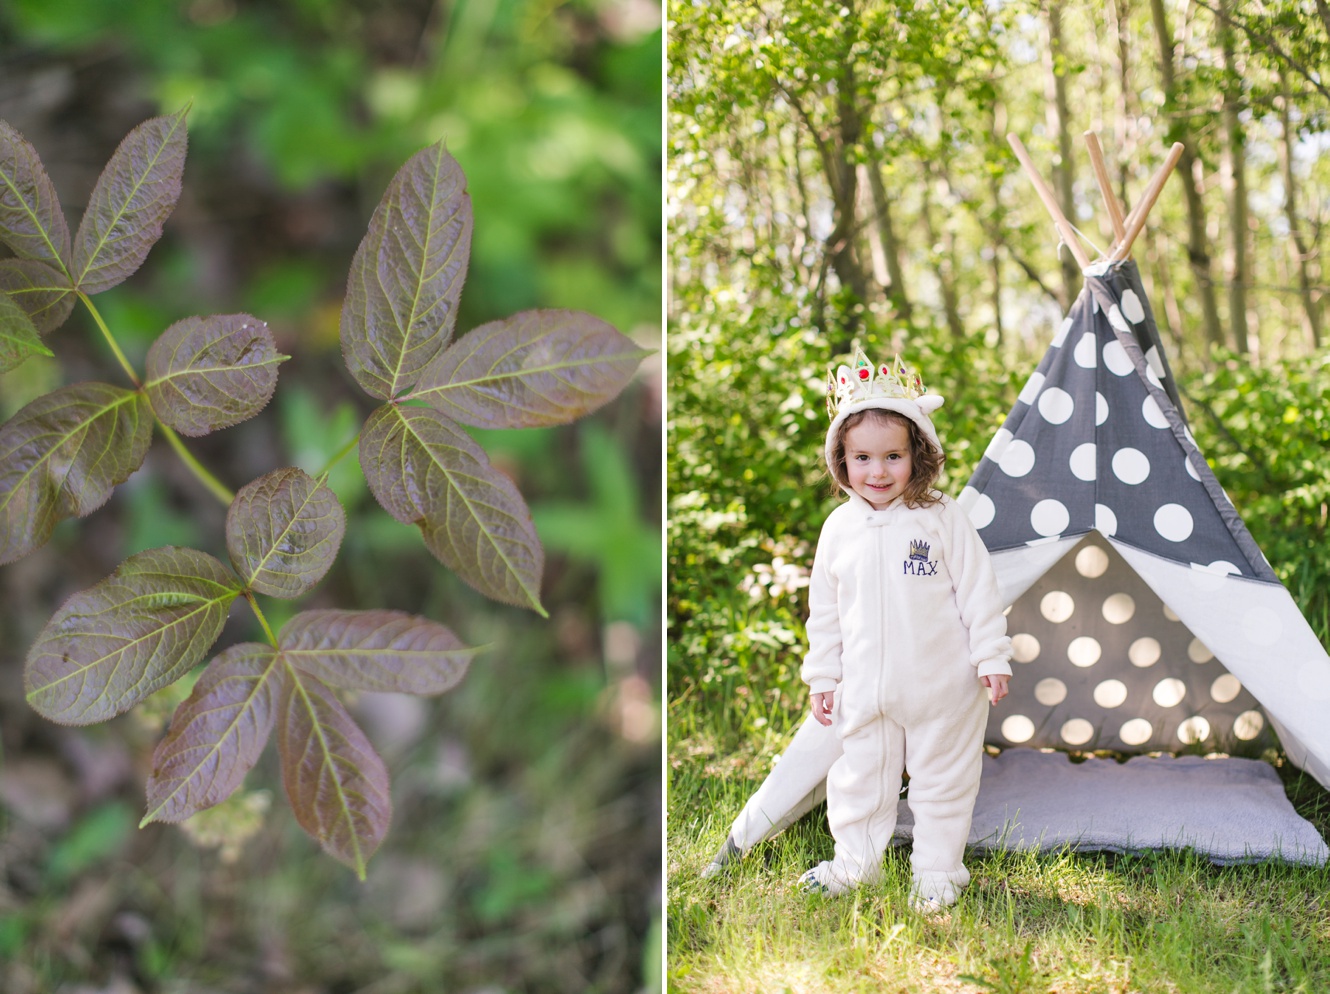 where the wild things are book inspired children's photo shoot with tent photo